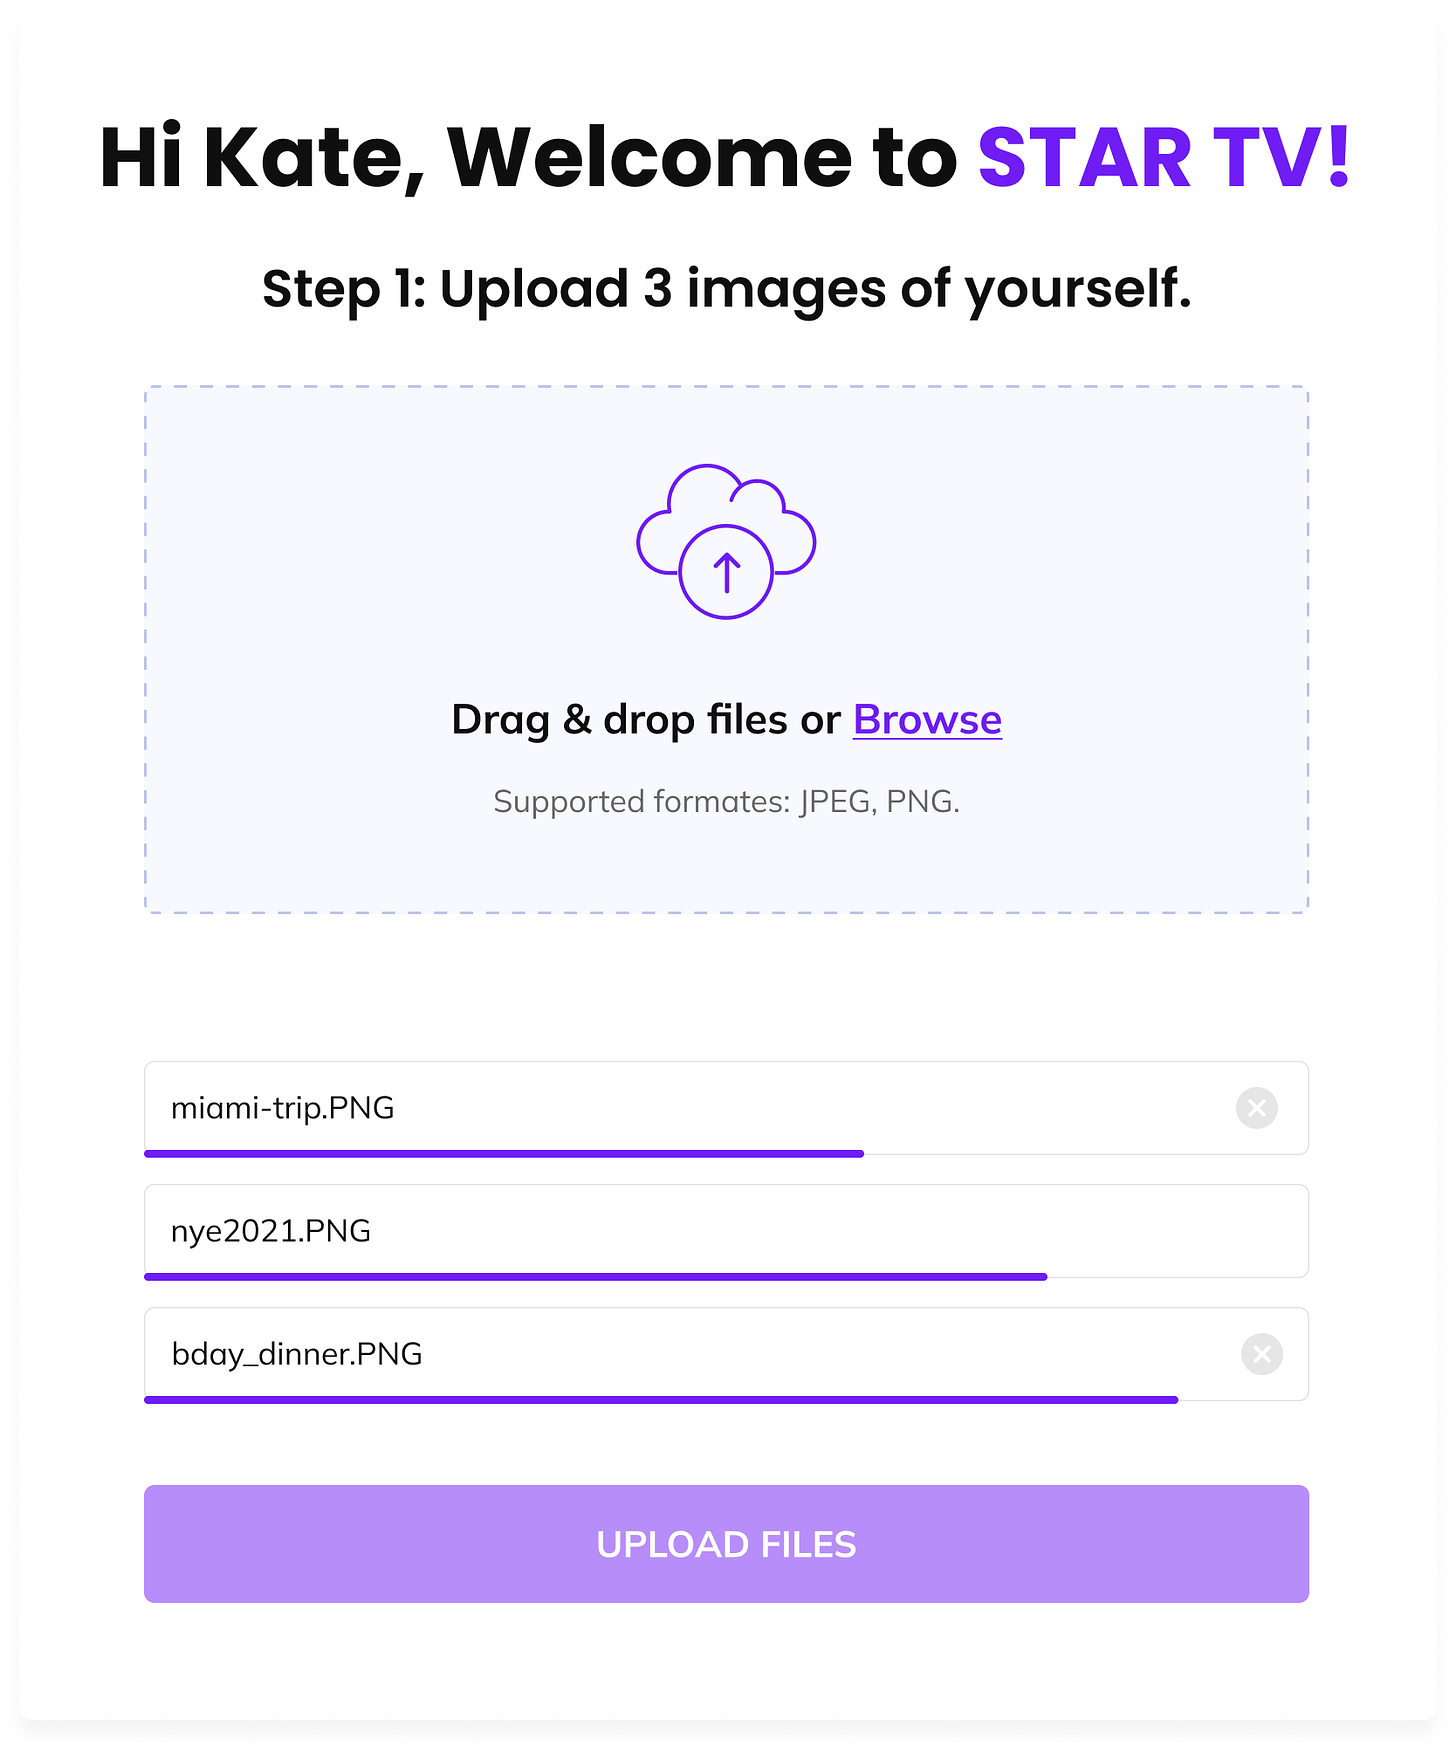 Website screenshot showing Star TV welcome message for Kate. Step 1 instructs user to upload three images of themself. Three images titled miami-trip.PNG, nye2021.PNG, bday_dinner.PNG are currently mid-upload.